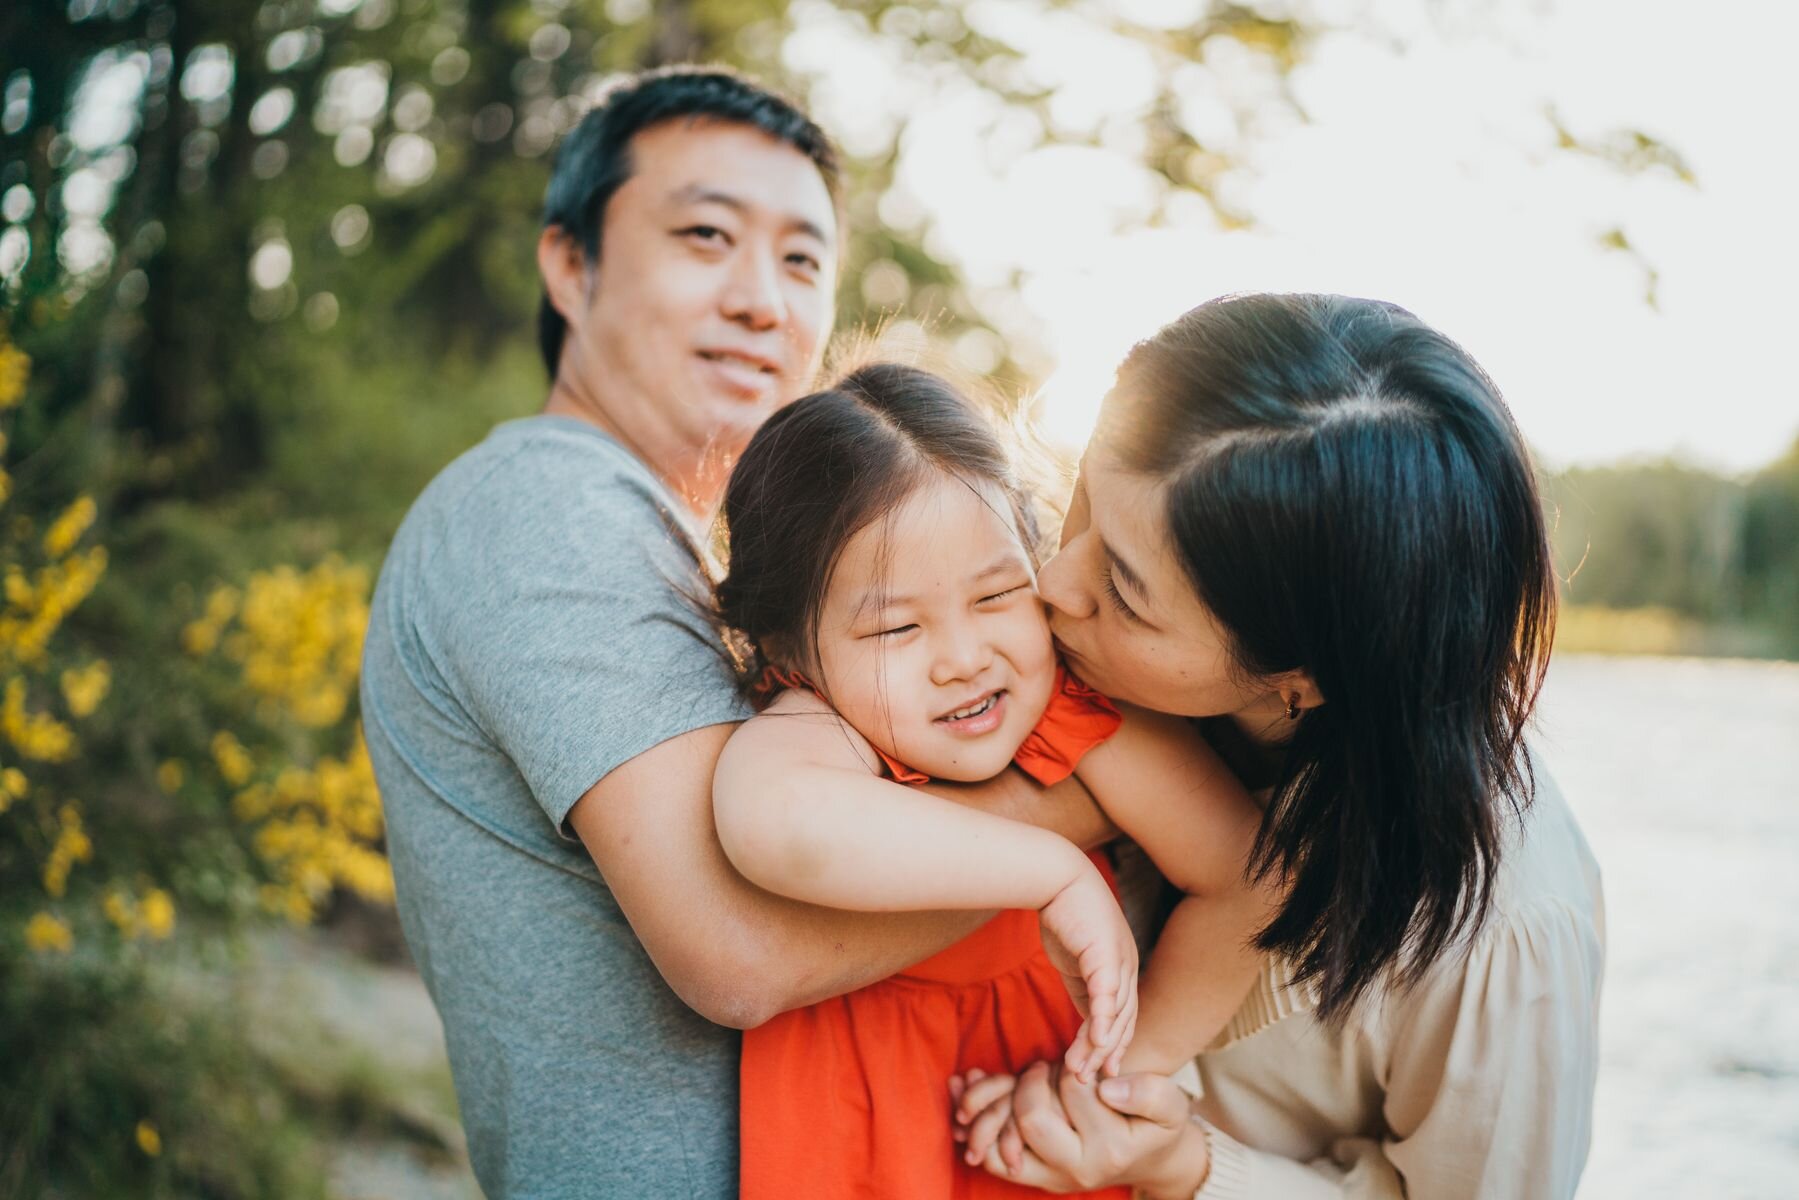 Bellevue family photographer - family of 3 loving on each other